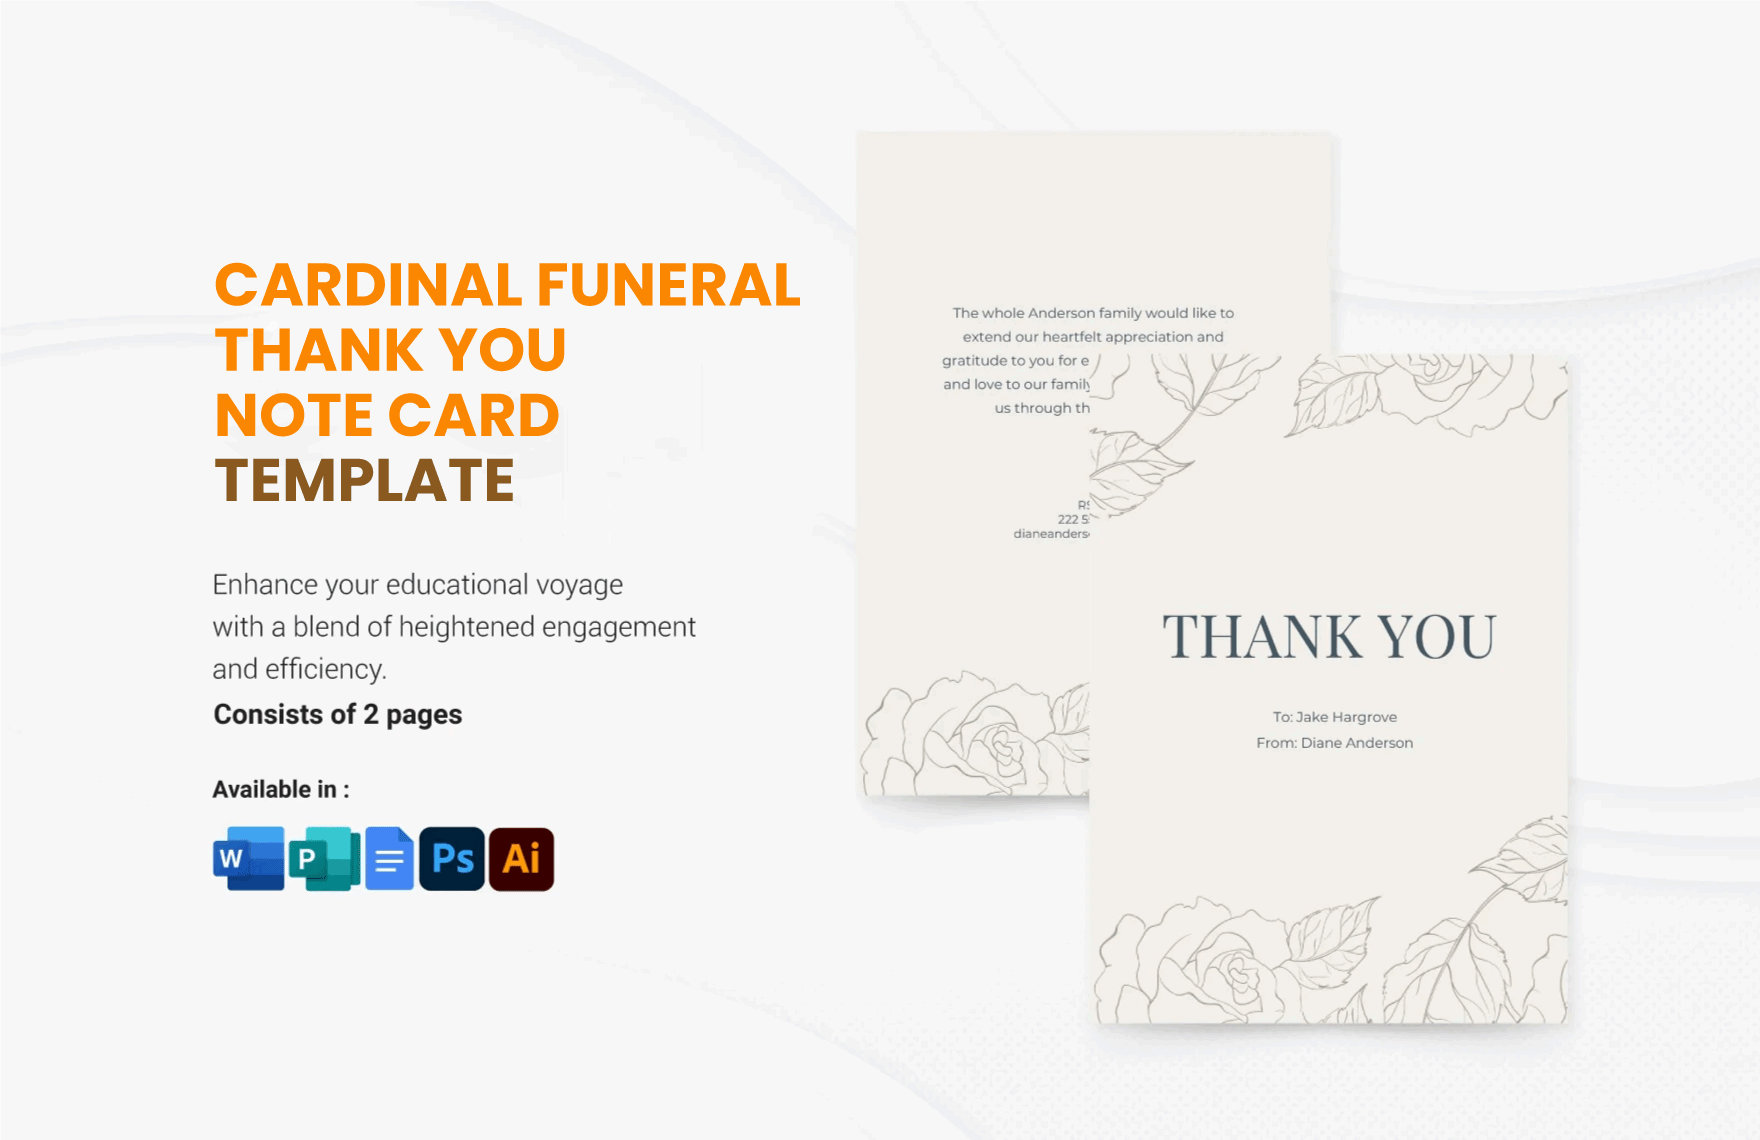 Cardinal Funeral Thank You Note Card Template in Word, Google Docs, Illustrator, PSD, Publisher